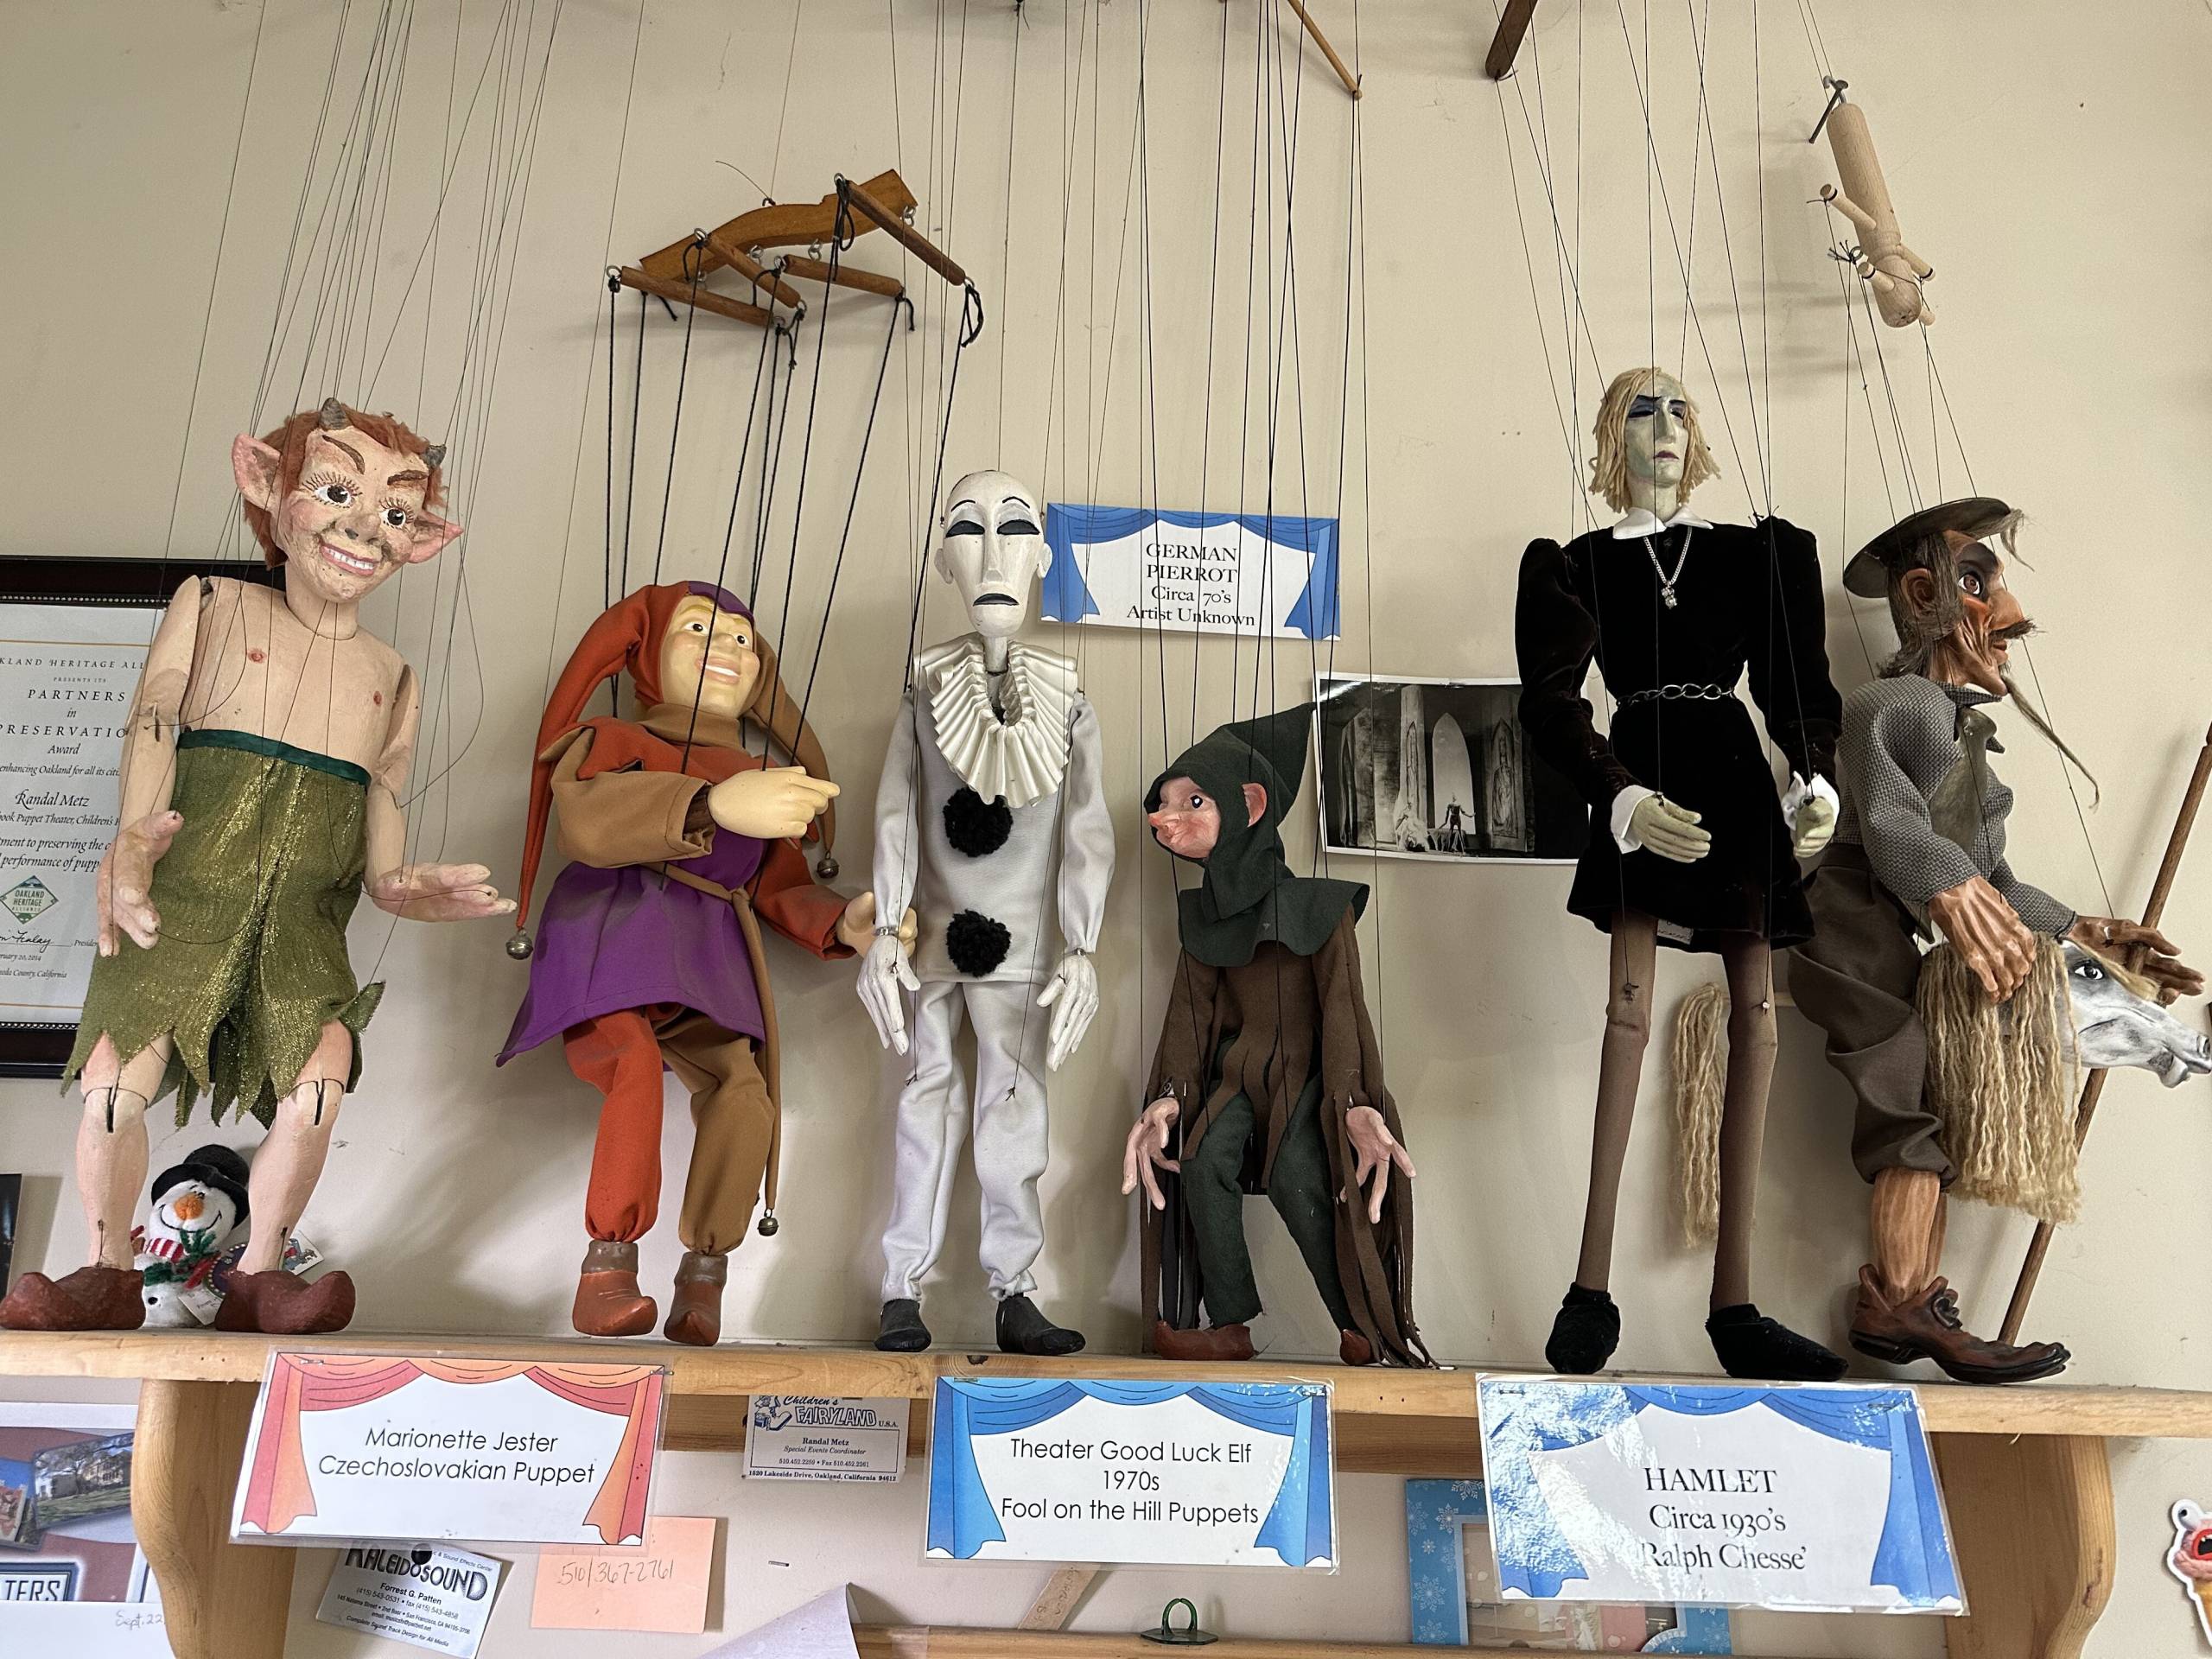 A view of six marionettes arranged on a high shelf, with varying styles, including a multicolored jester and a white-faced mime.